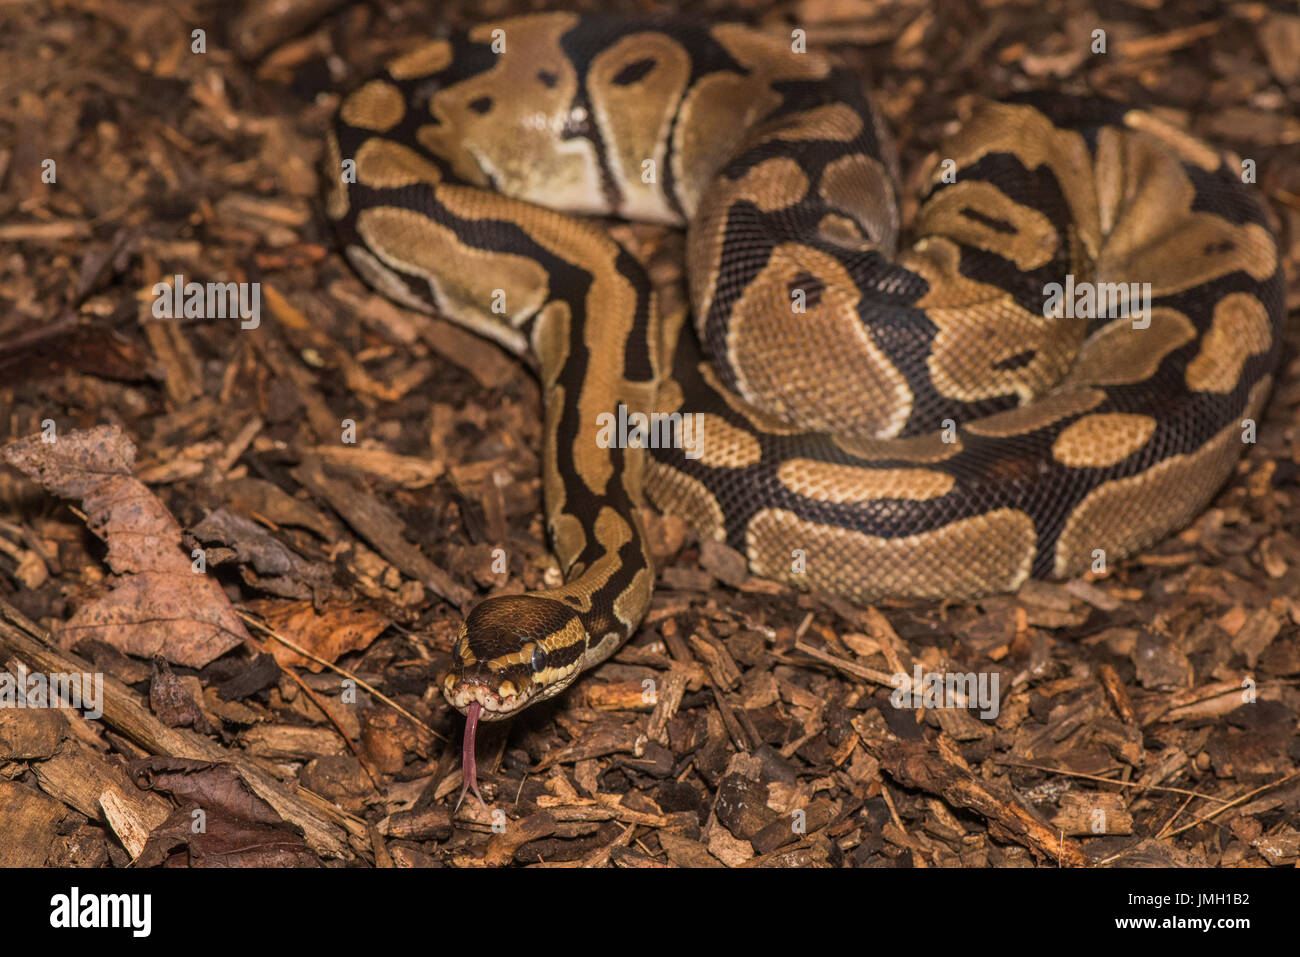 A small ball python snake soaking in a tub of water Stock Photo - Alamy